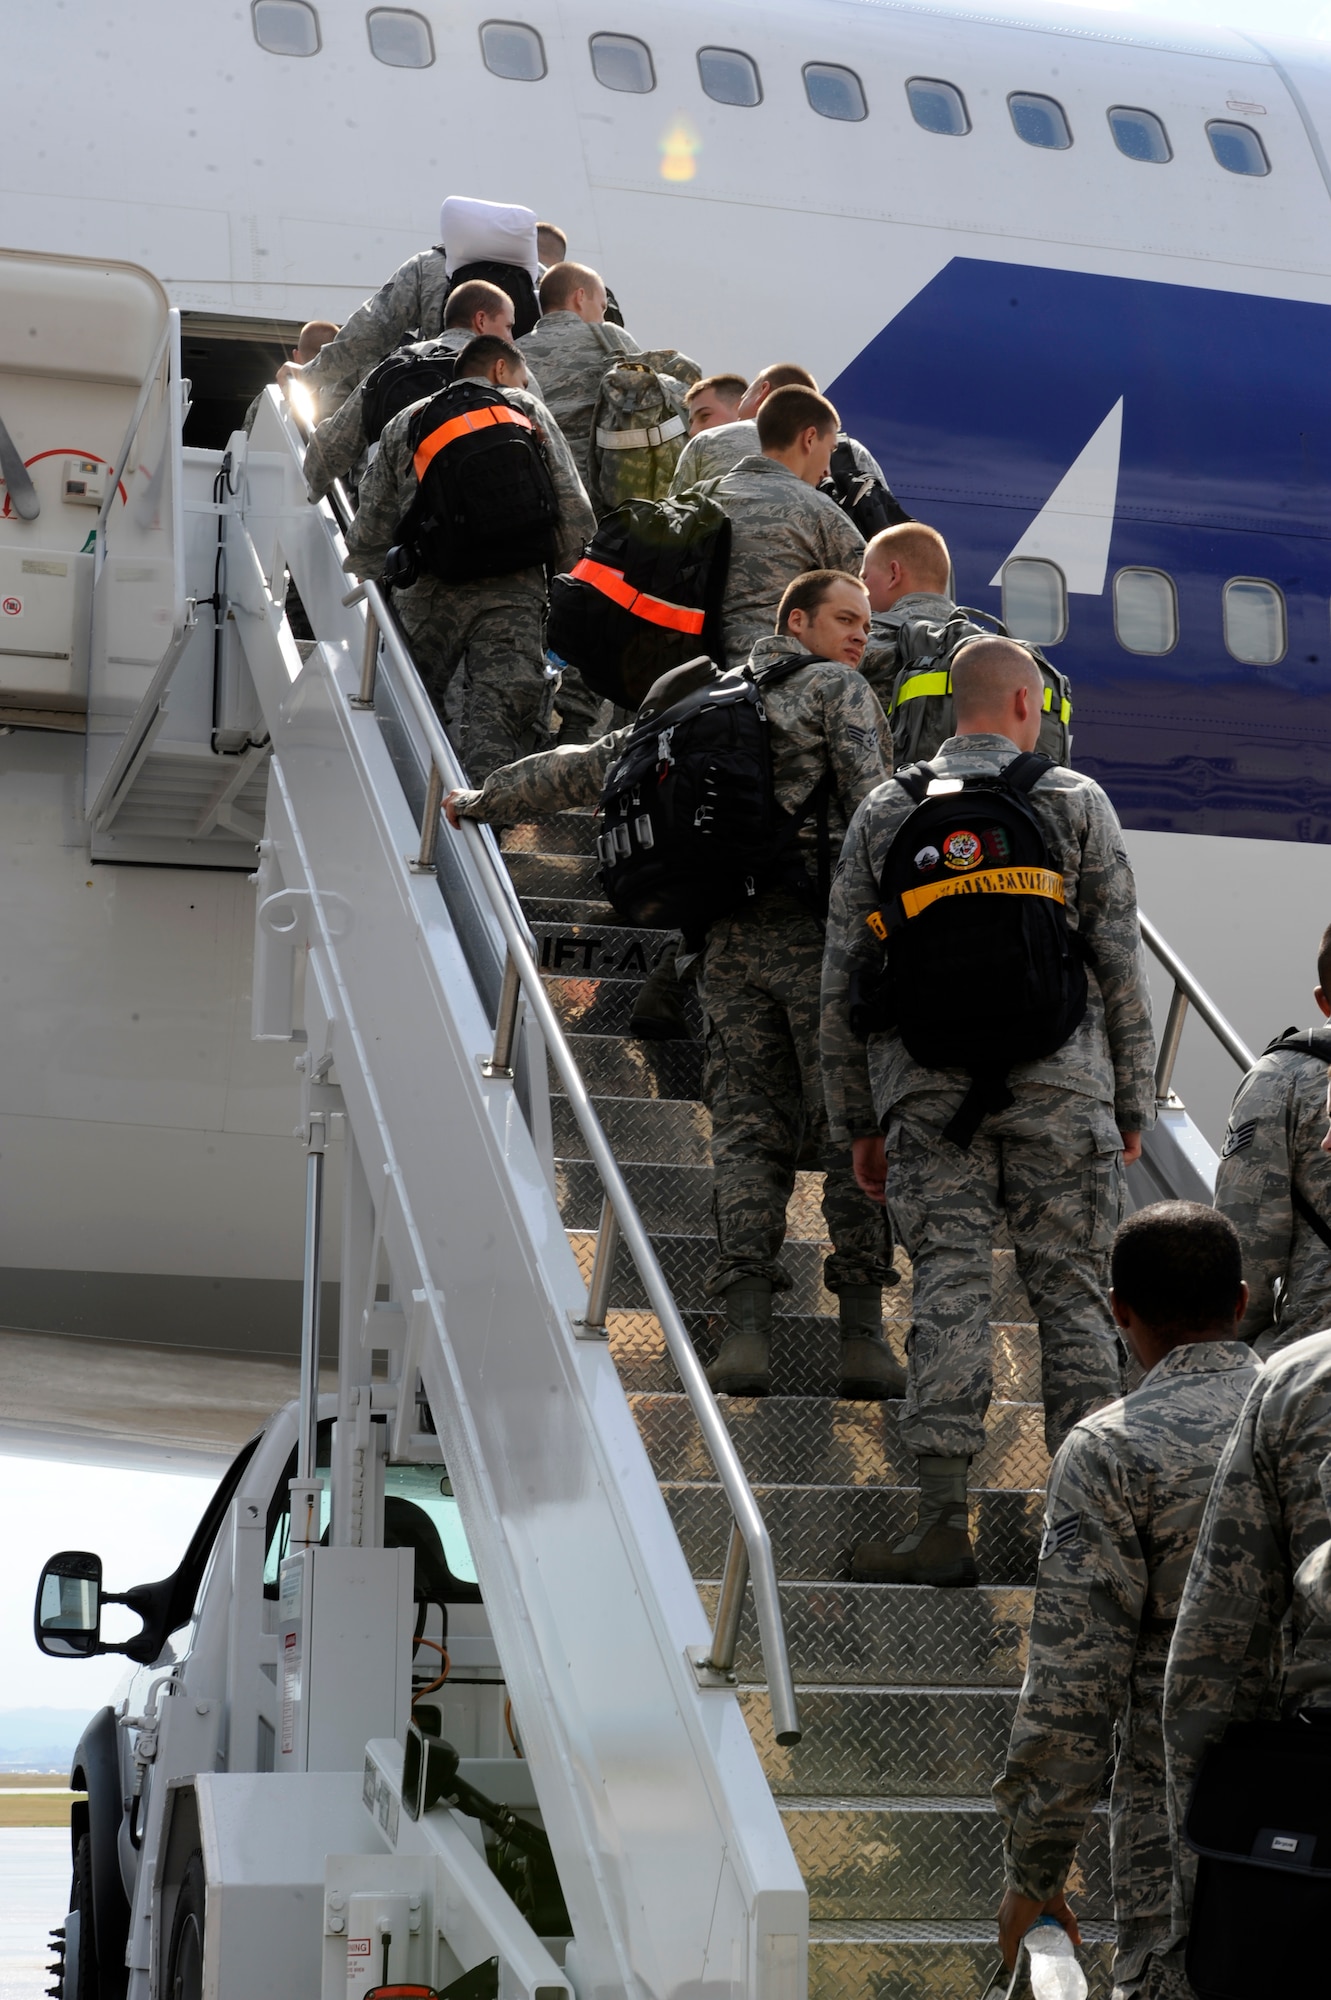 Approximately 350 Airmen from Ellsworth Air Force Base, S.D., file up the air stairs prior to departing on a six-month deployment to Southwest Asia, July 21, 2012. The Airmen will be supporting missions in the U.S. Central Command area of responsibility. (U.S. Air Force photo by Airman Ashley J. Cass/Released)